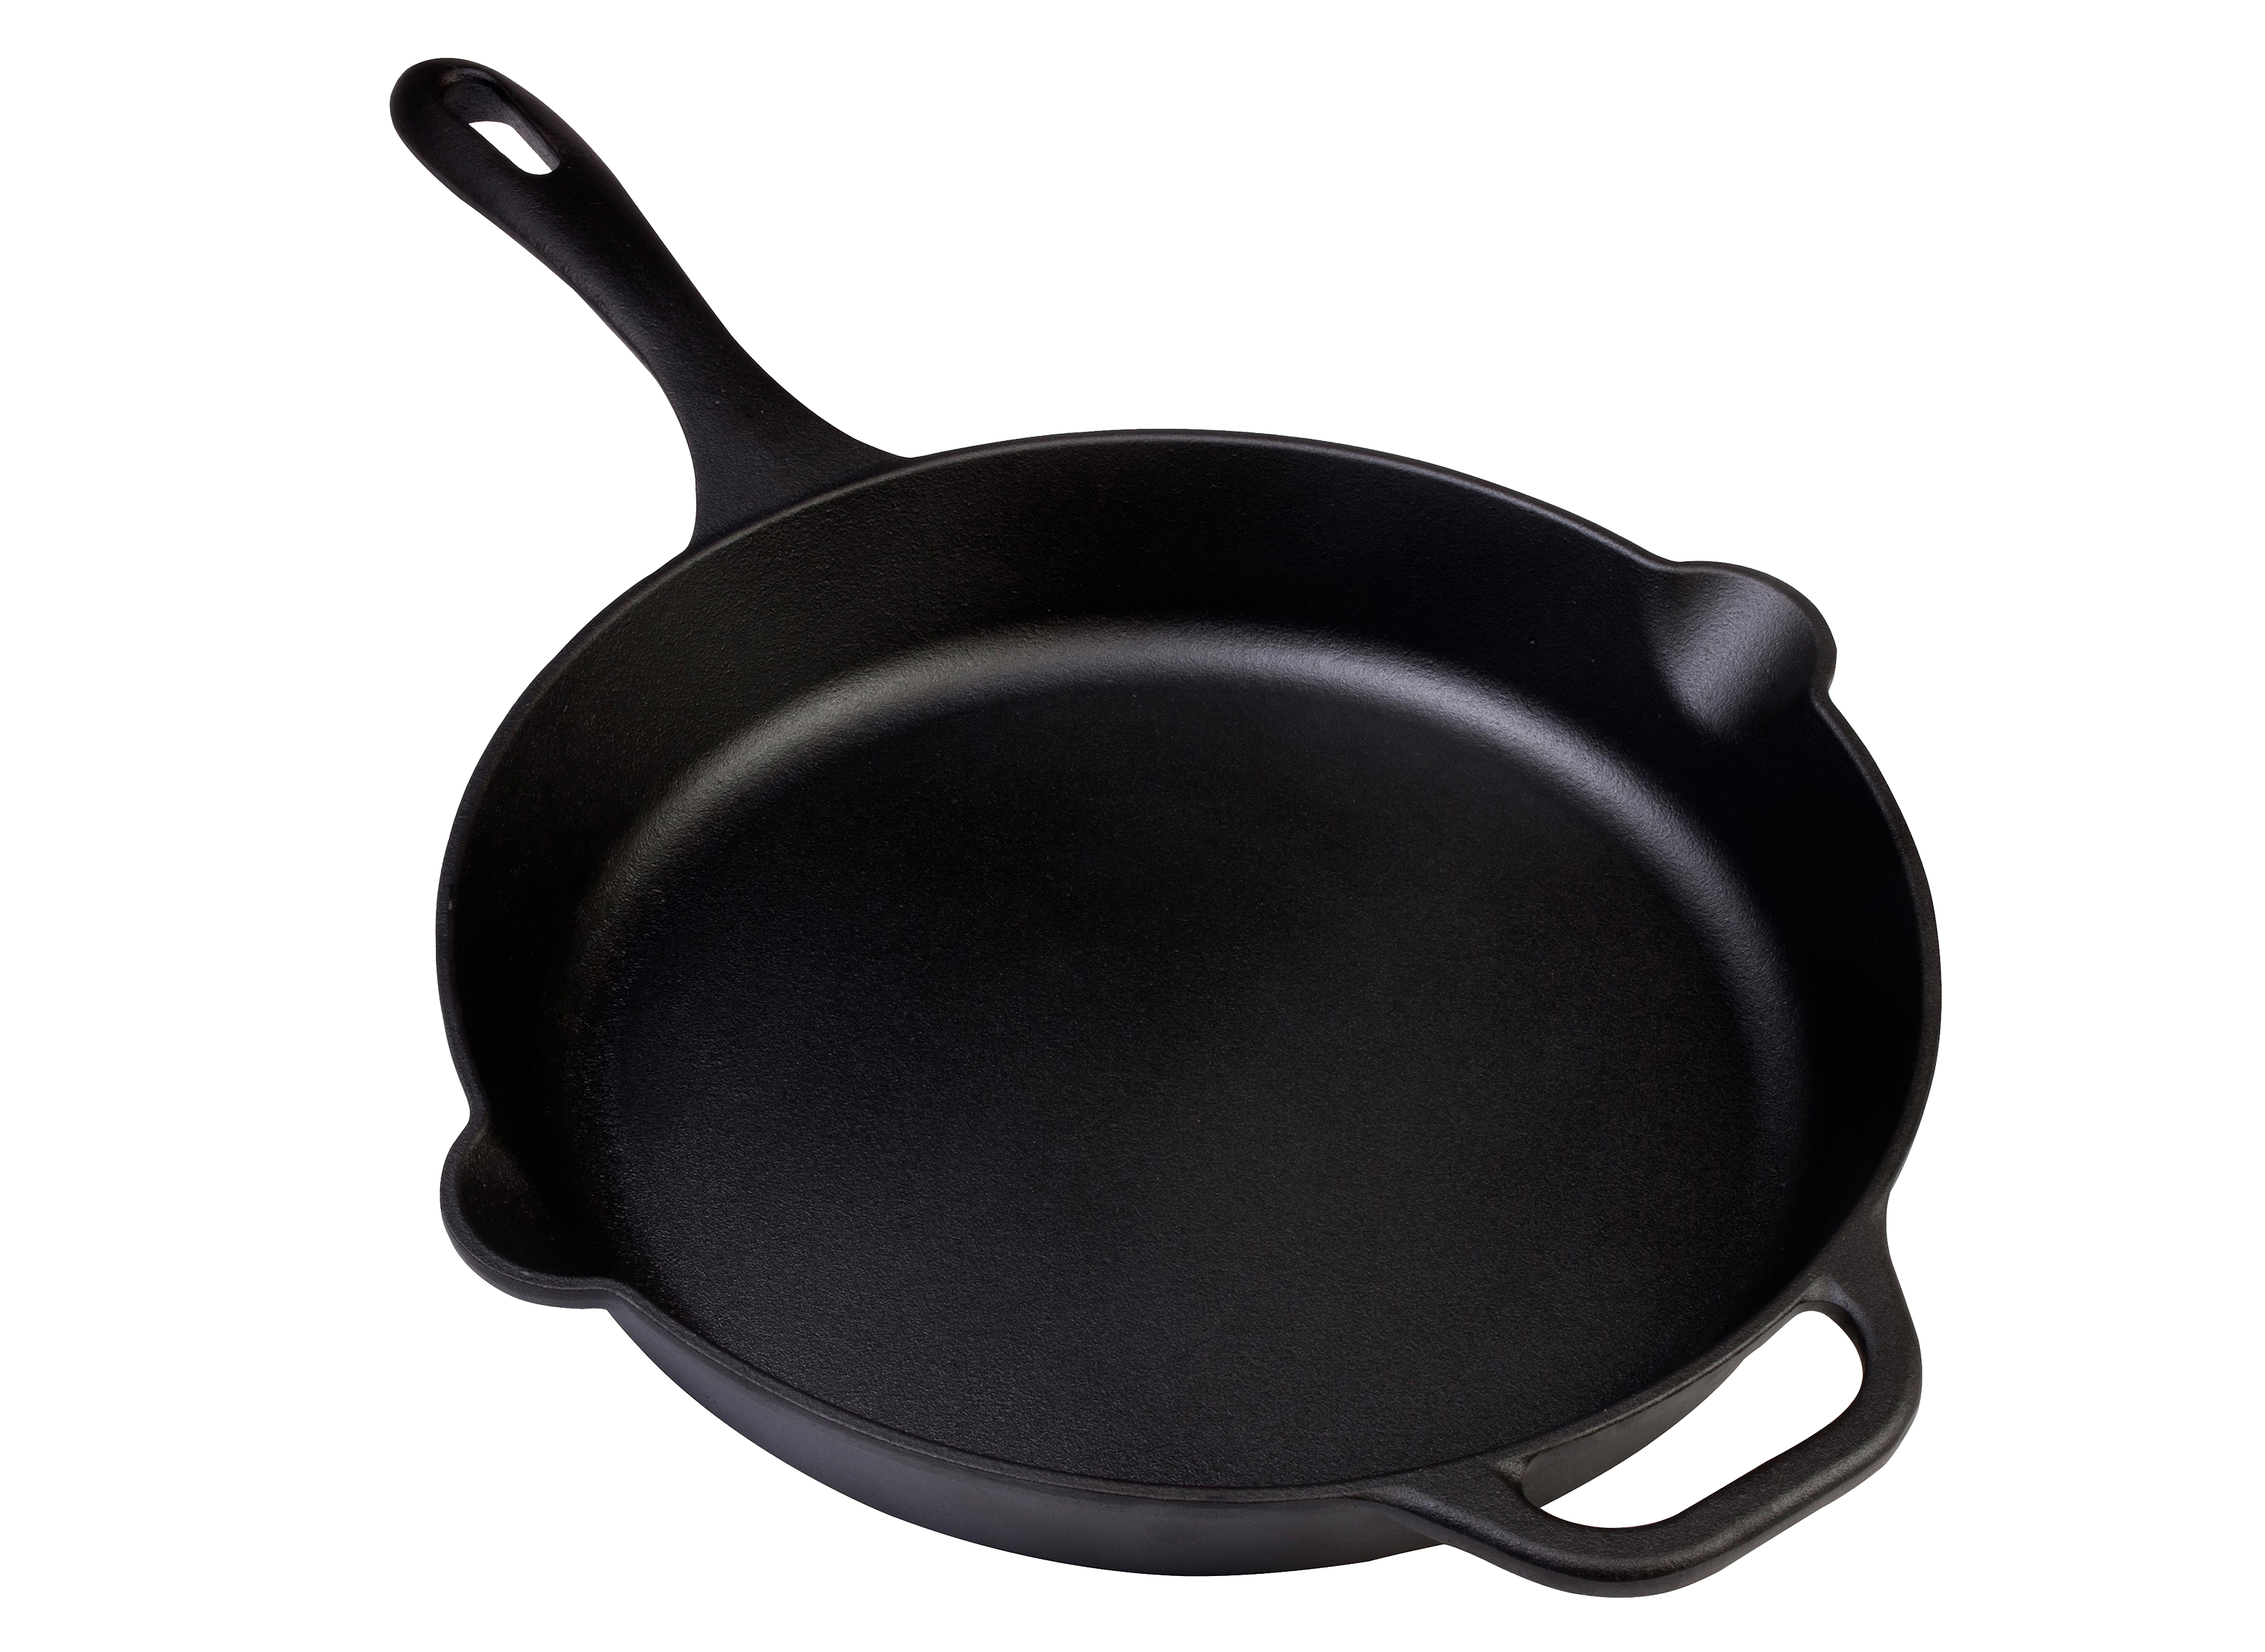 https://crdms.images.consumerreports.org/prod/products/cr/models/397717-frying-pans-victoria-pre-seasoned-cast-iron-skillet-10002863.png